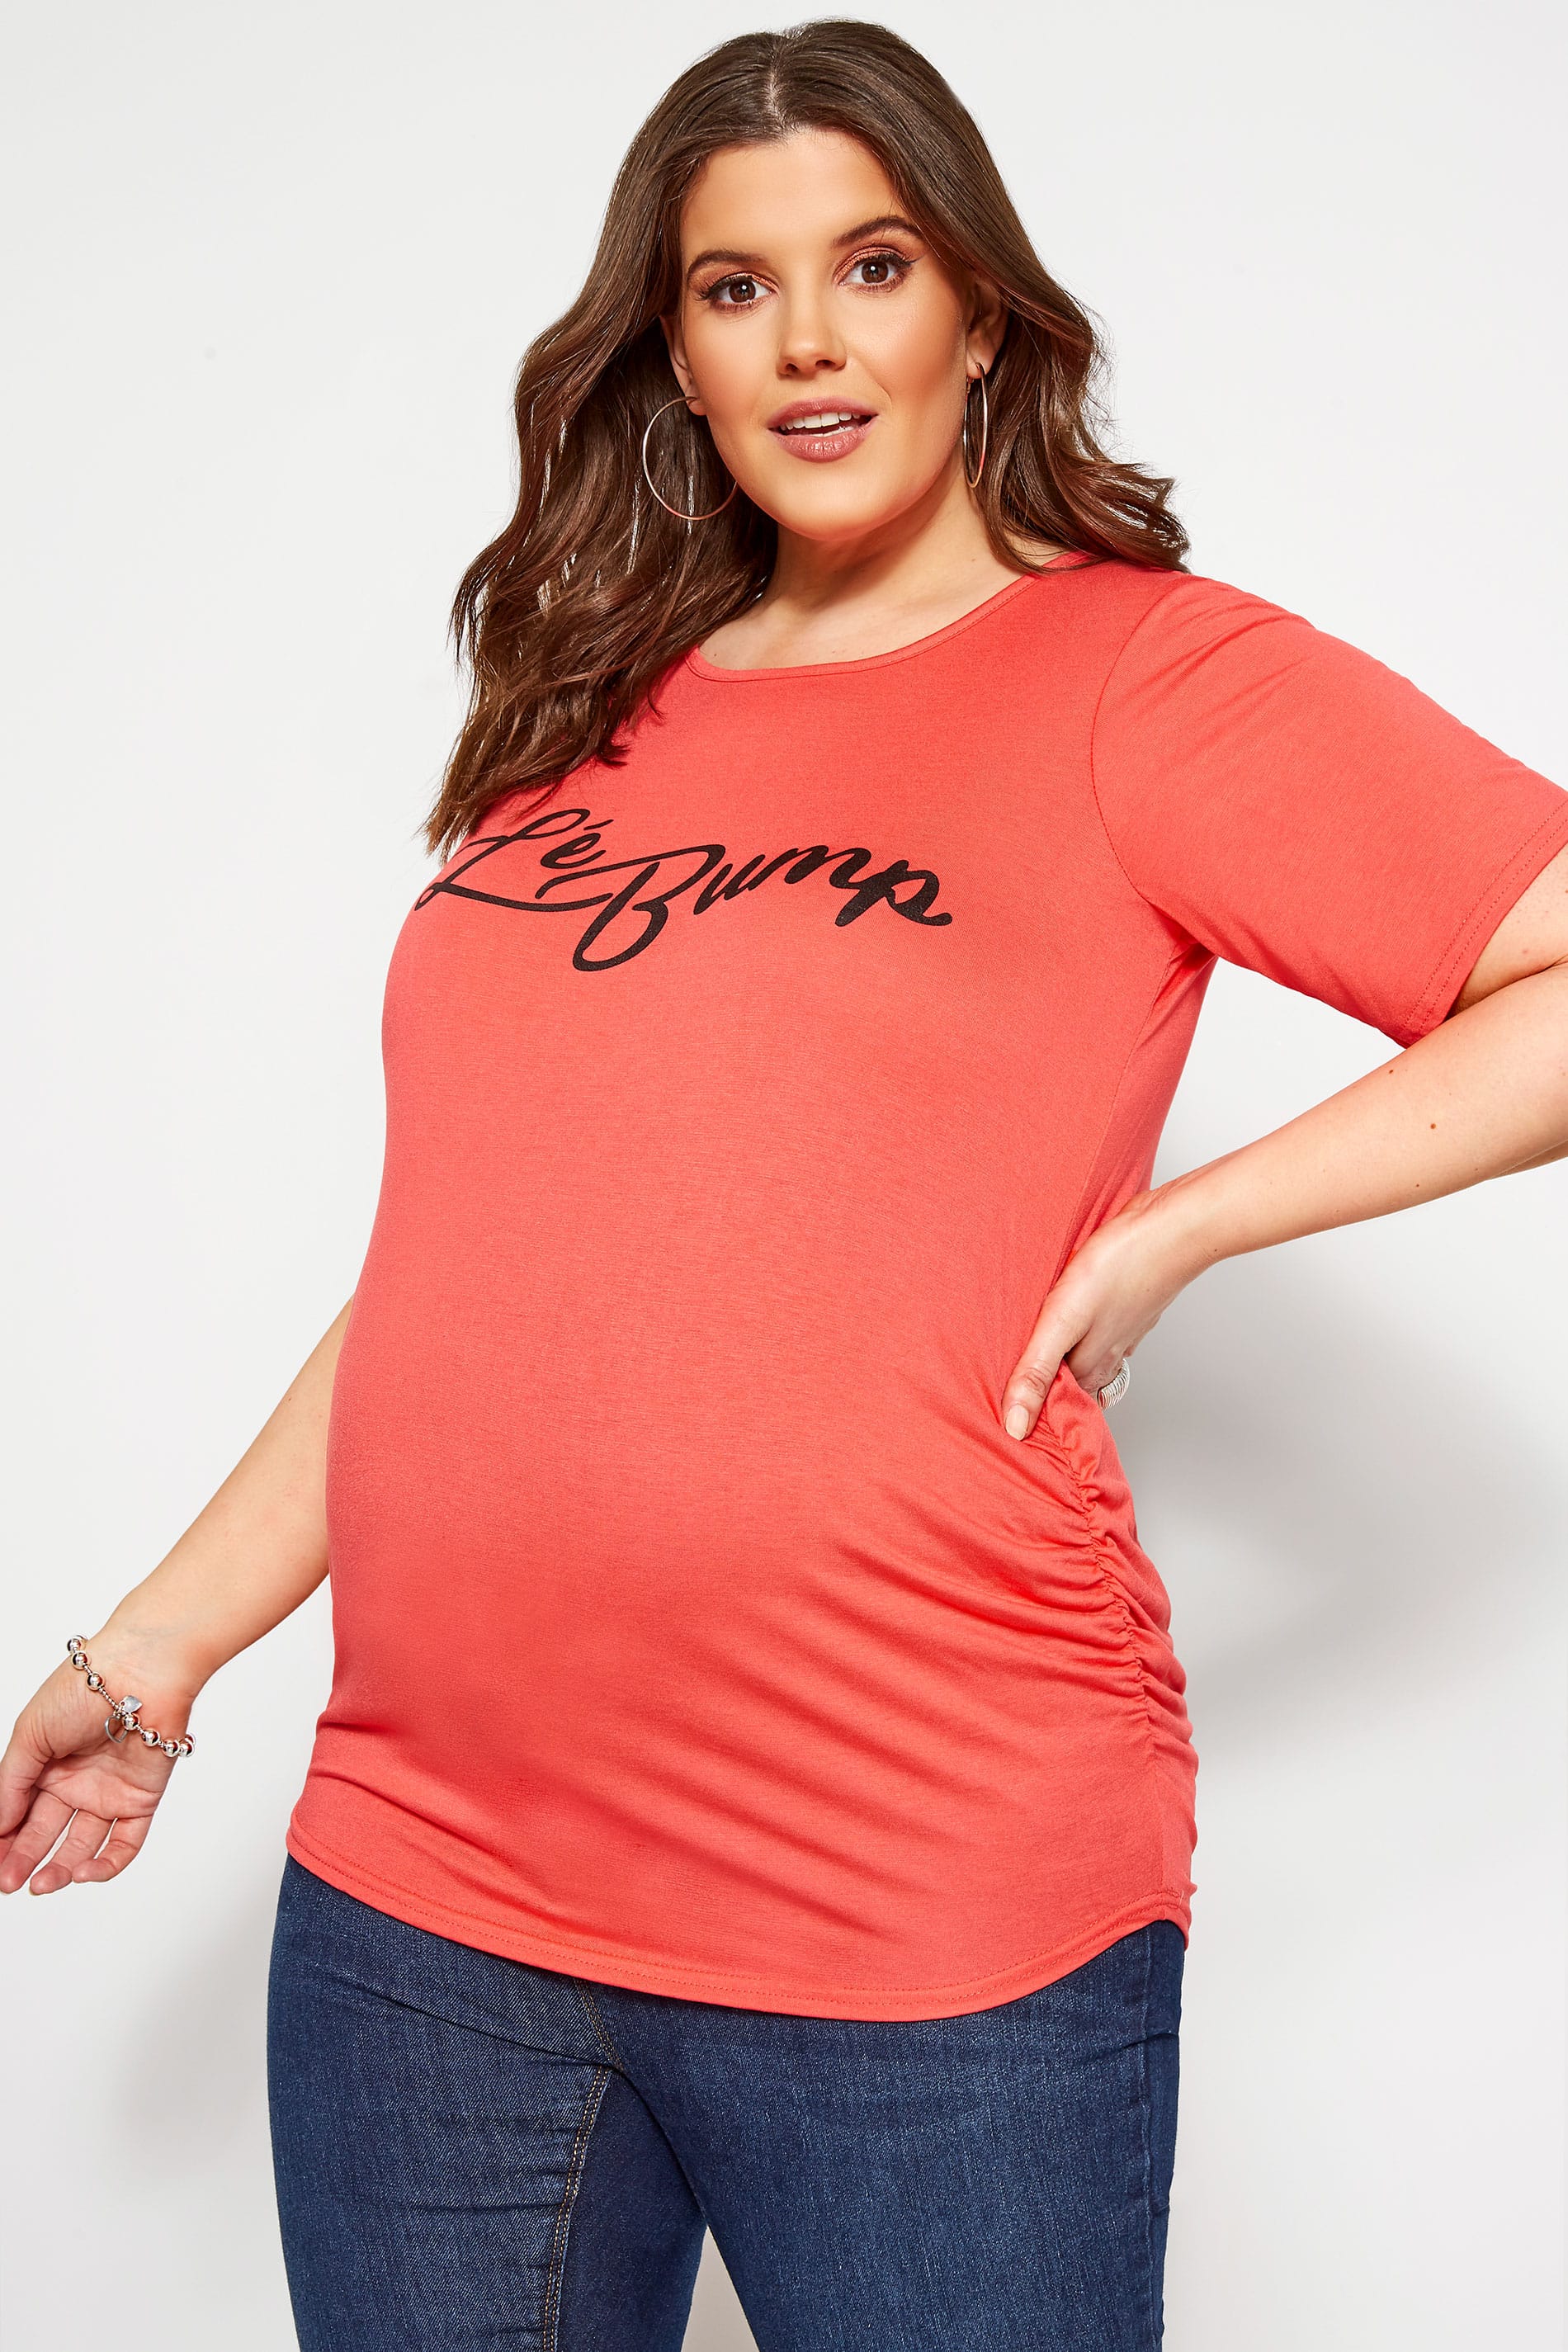 Yours Clothing Bump it up maternity coral pink 'lé bump' slogan tshirt